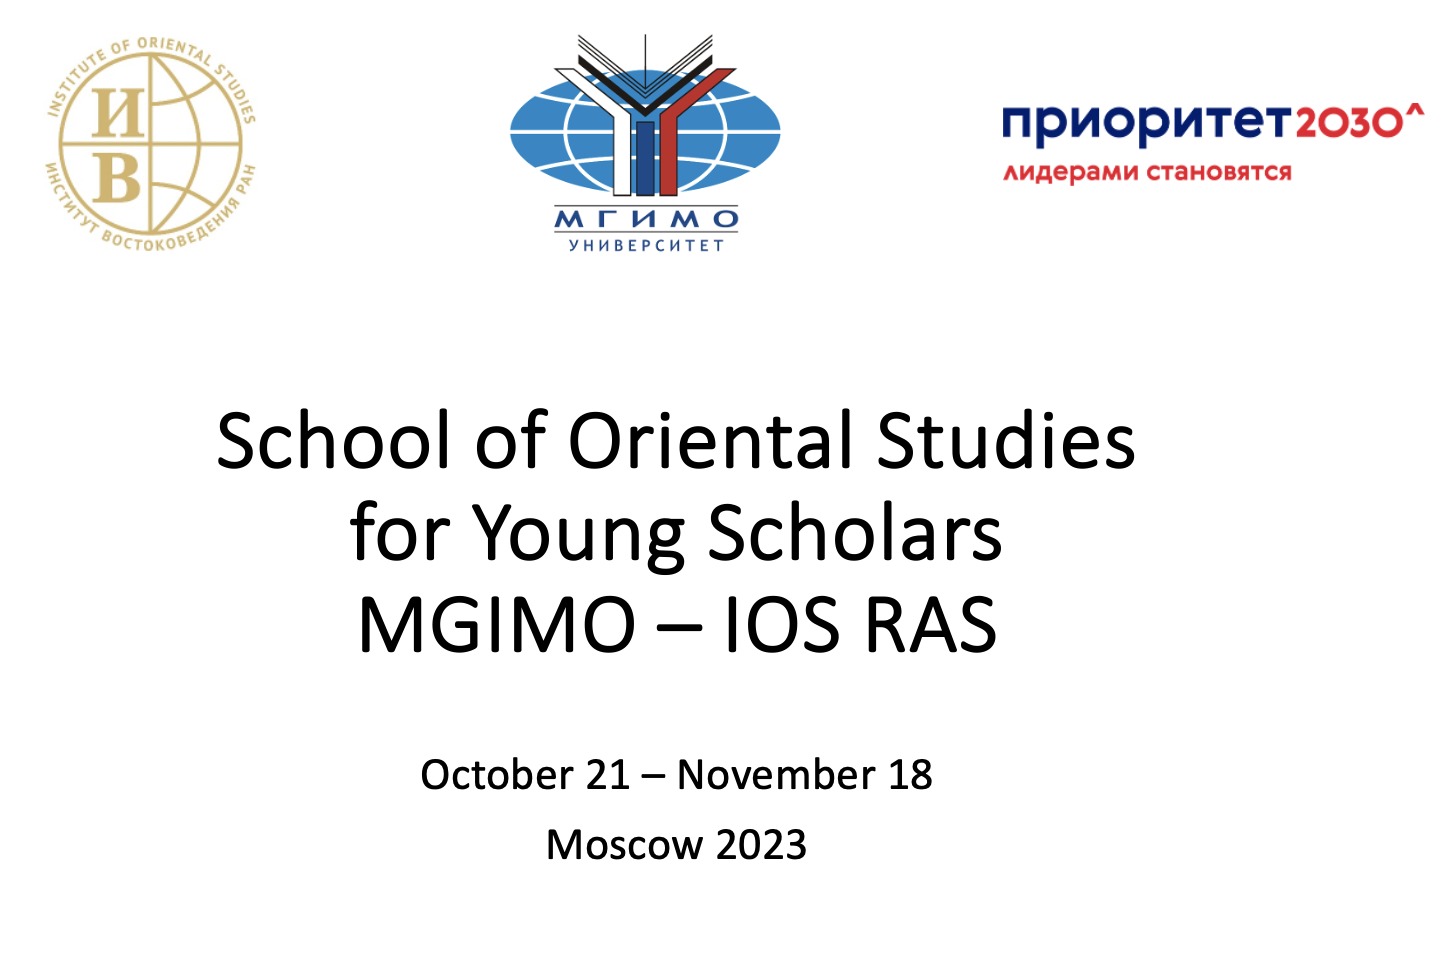 School of Oriental Studies for Young Scholars (MGIMO – IOS RAS)